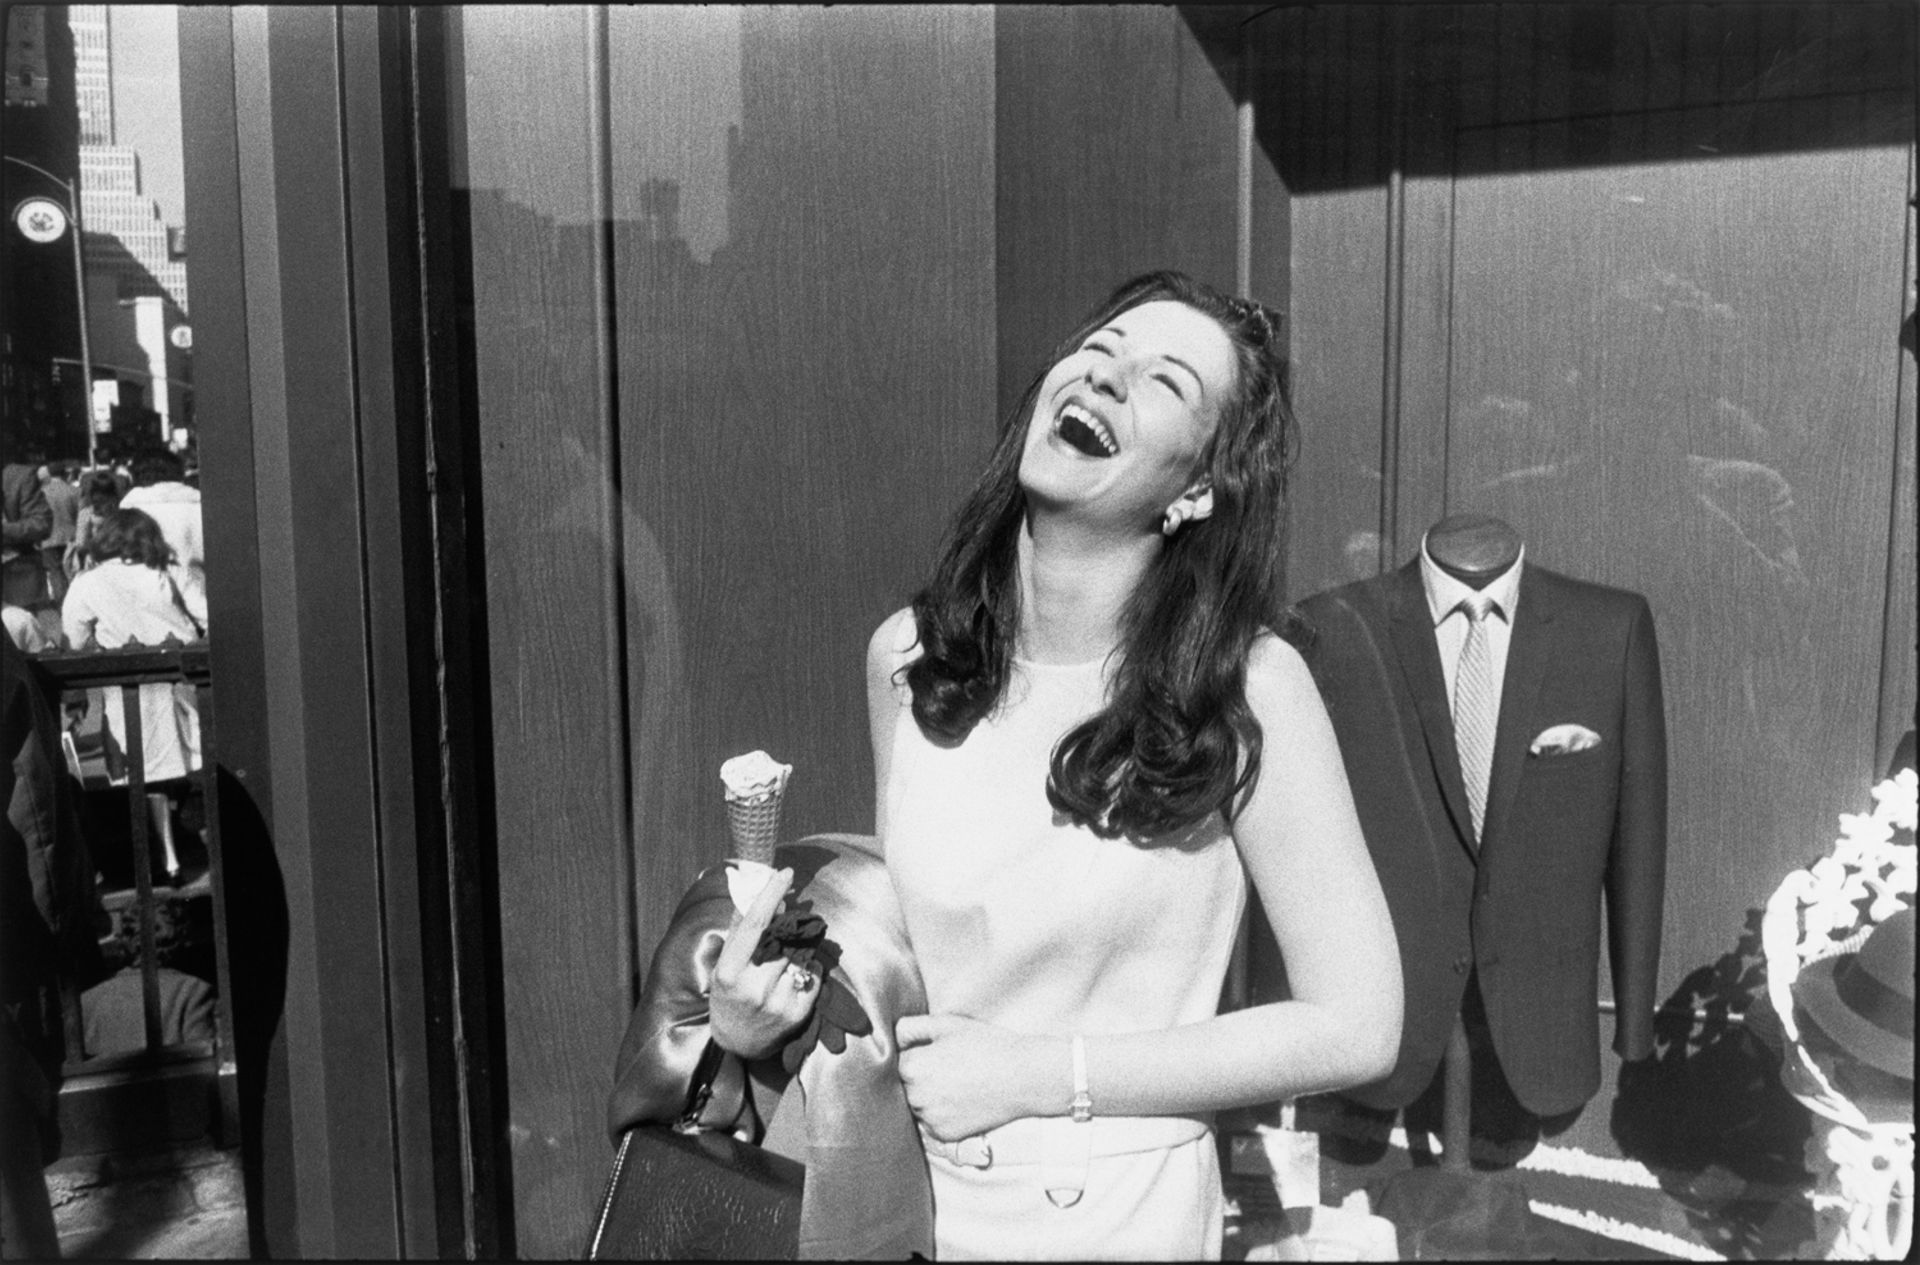 Garry Winogrand's Women are Beautiful portfolio (1968, printed 1981) is part of the collection coming to auction. Courtesy Sotheby's